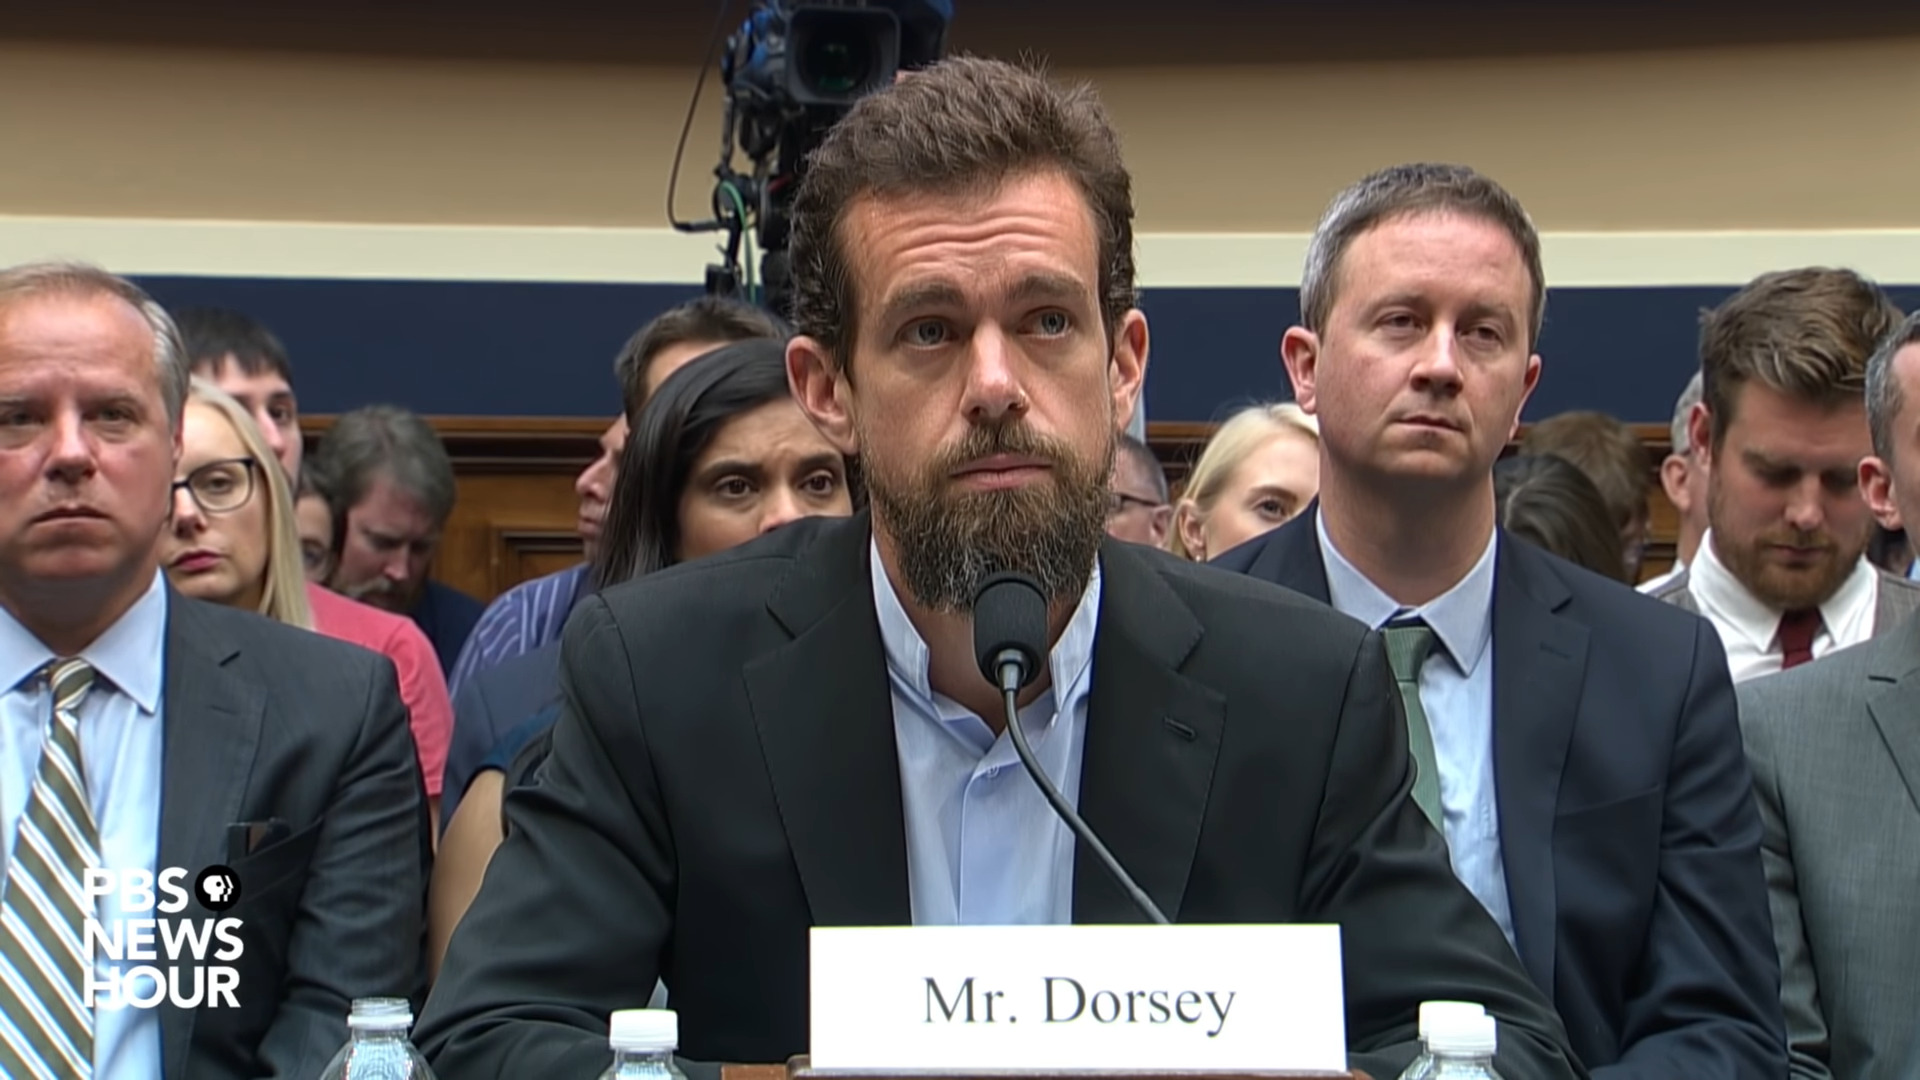 Jack Dorsey tells Congress that Twitter 'does not use political ideology to make any decisions' via PBS News Hour YouTube